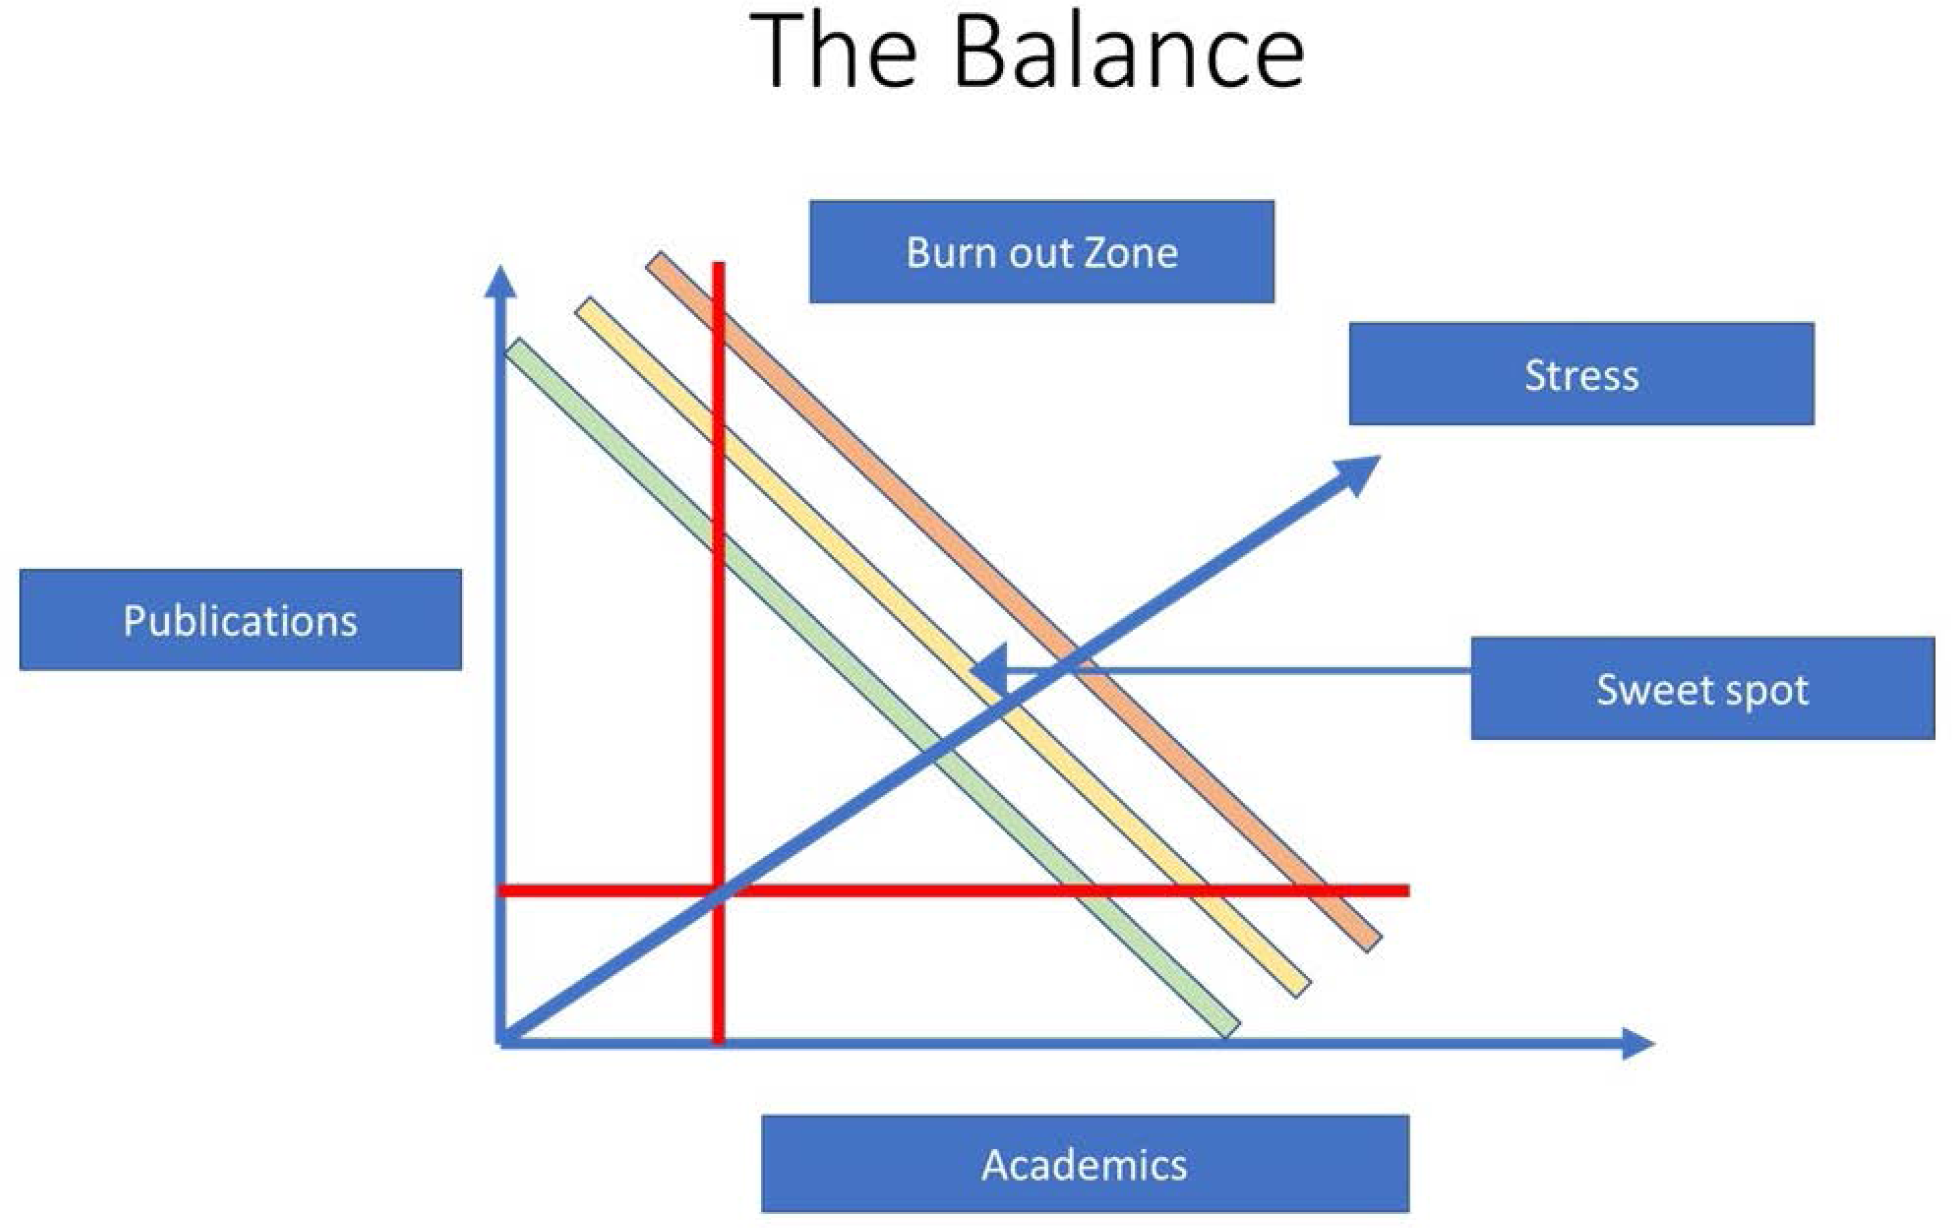 Triangle of balance showing perceived trade-off between academics and publications.